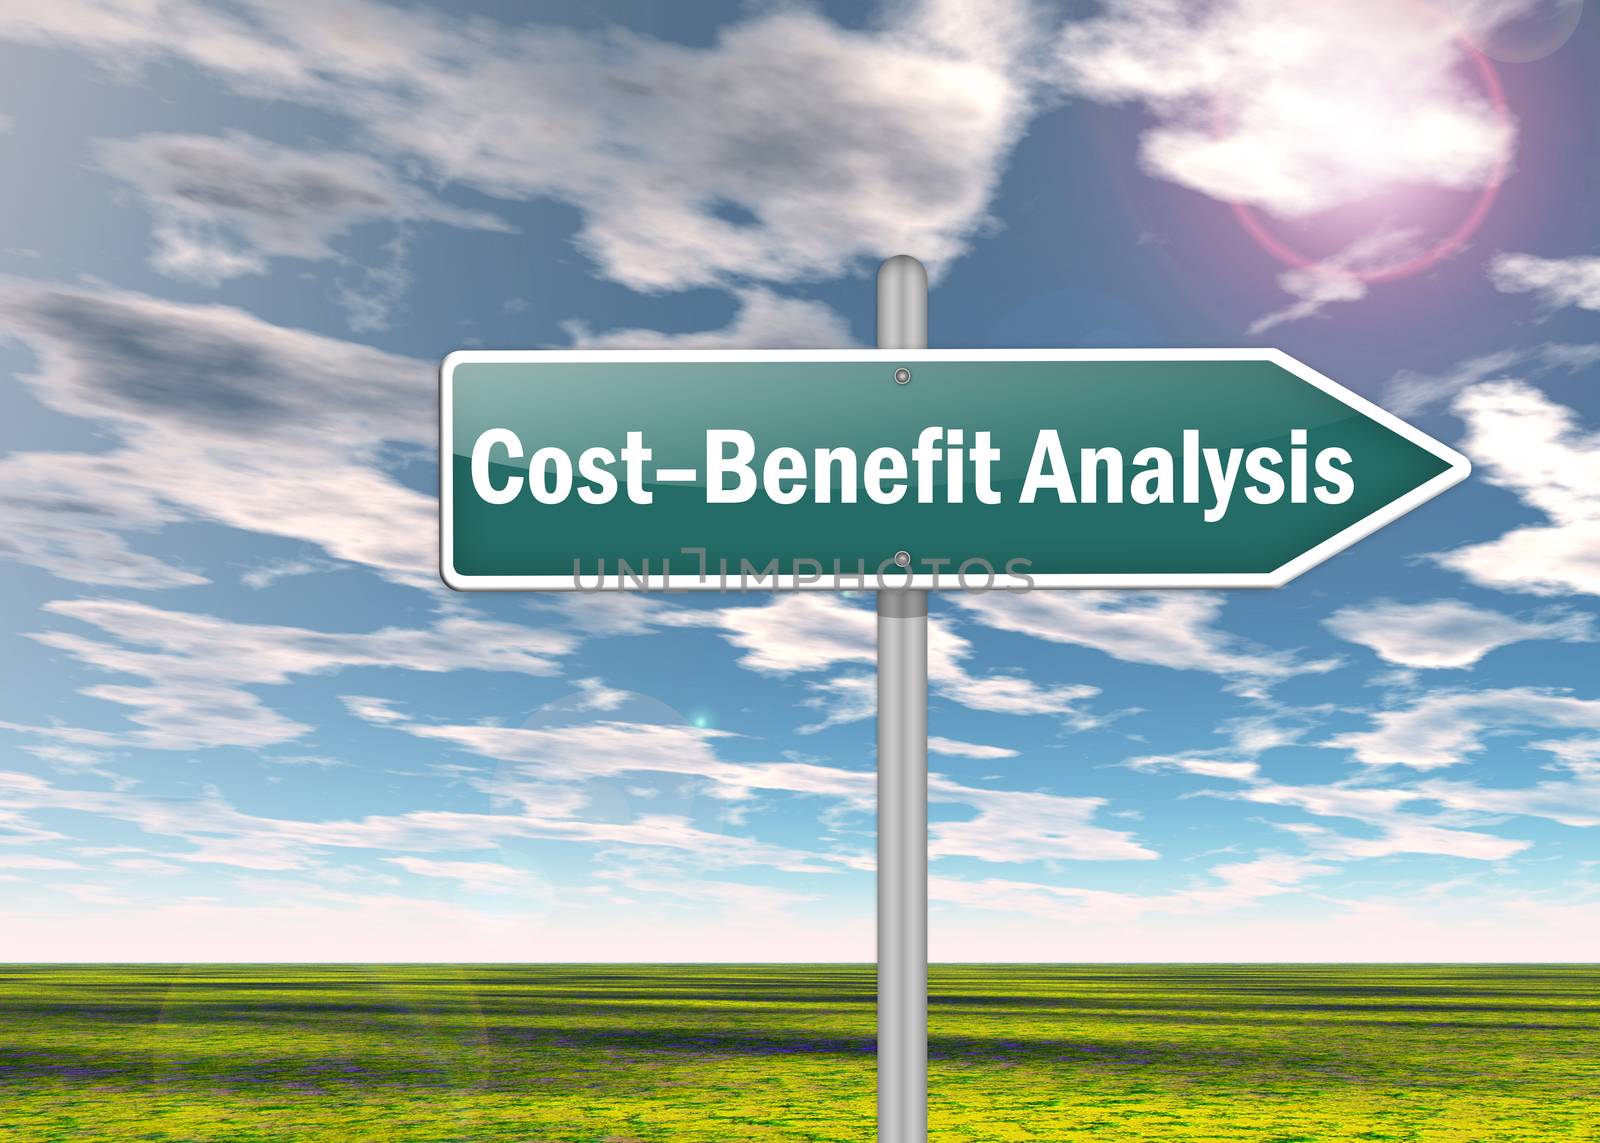 Signpost "Cost-Benefit Analysis" by mindscanner